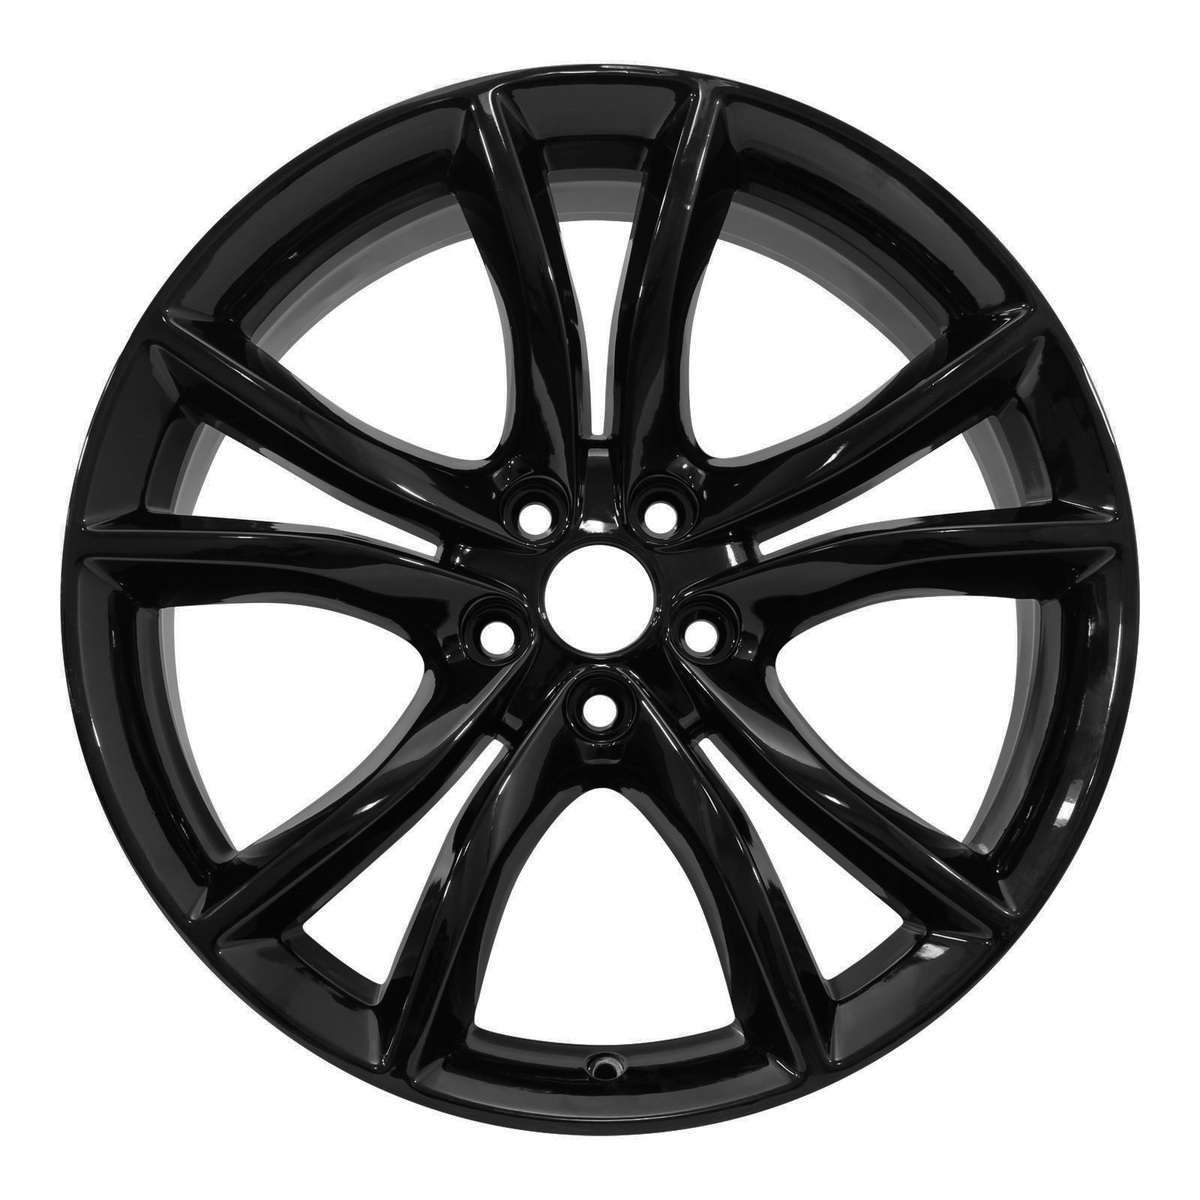 2018 Dodge Charger New 20" Replacement Wheel Rim RW2563B